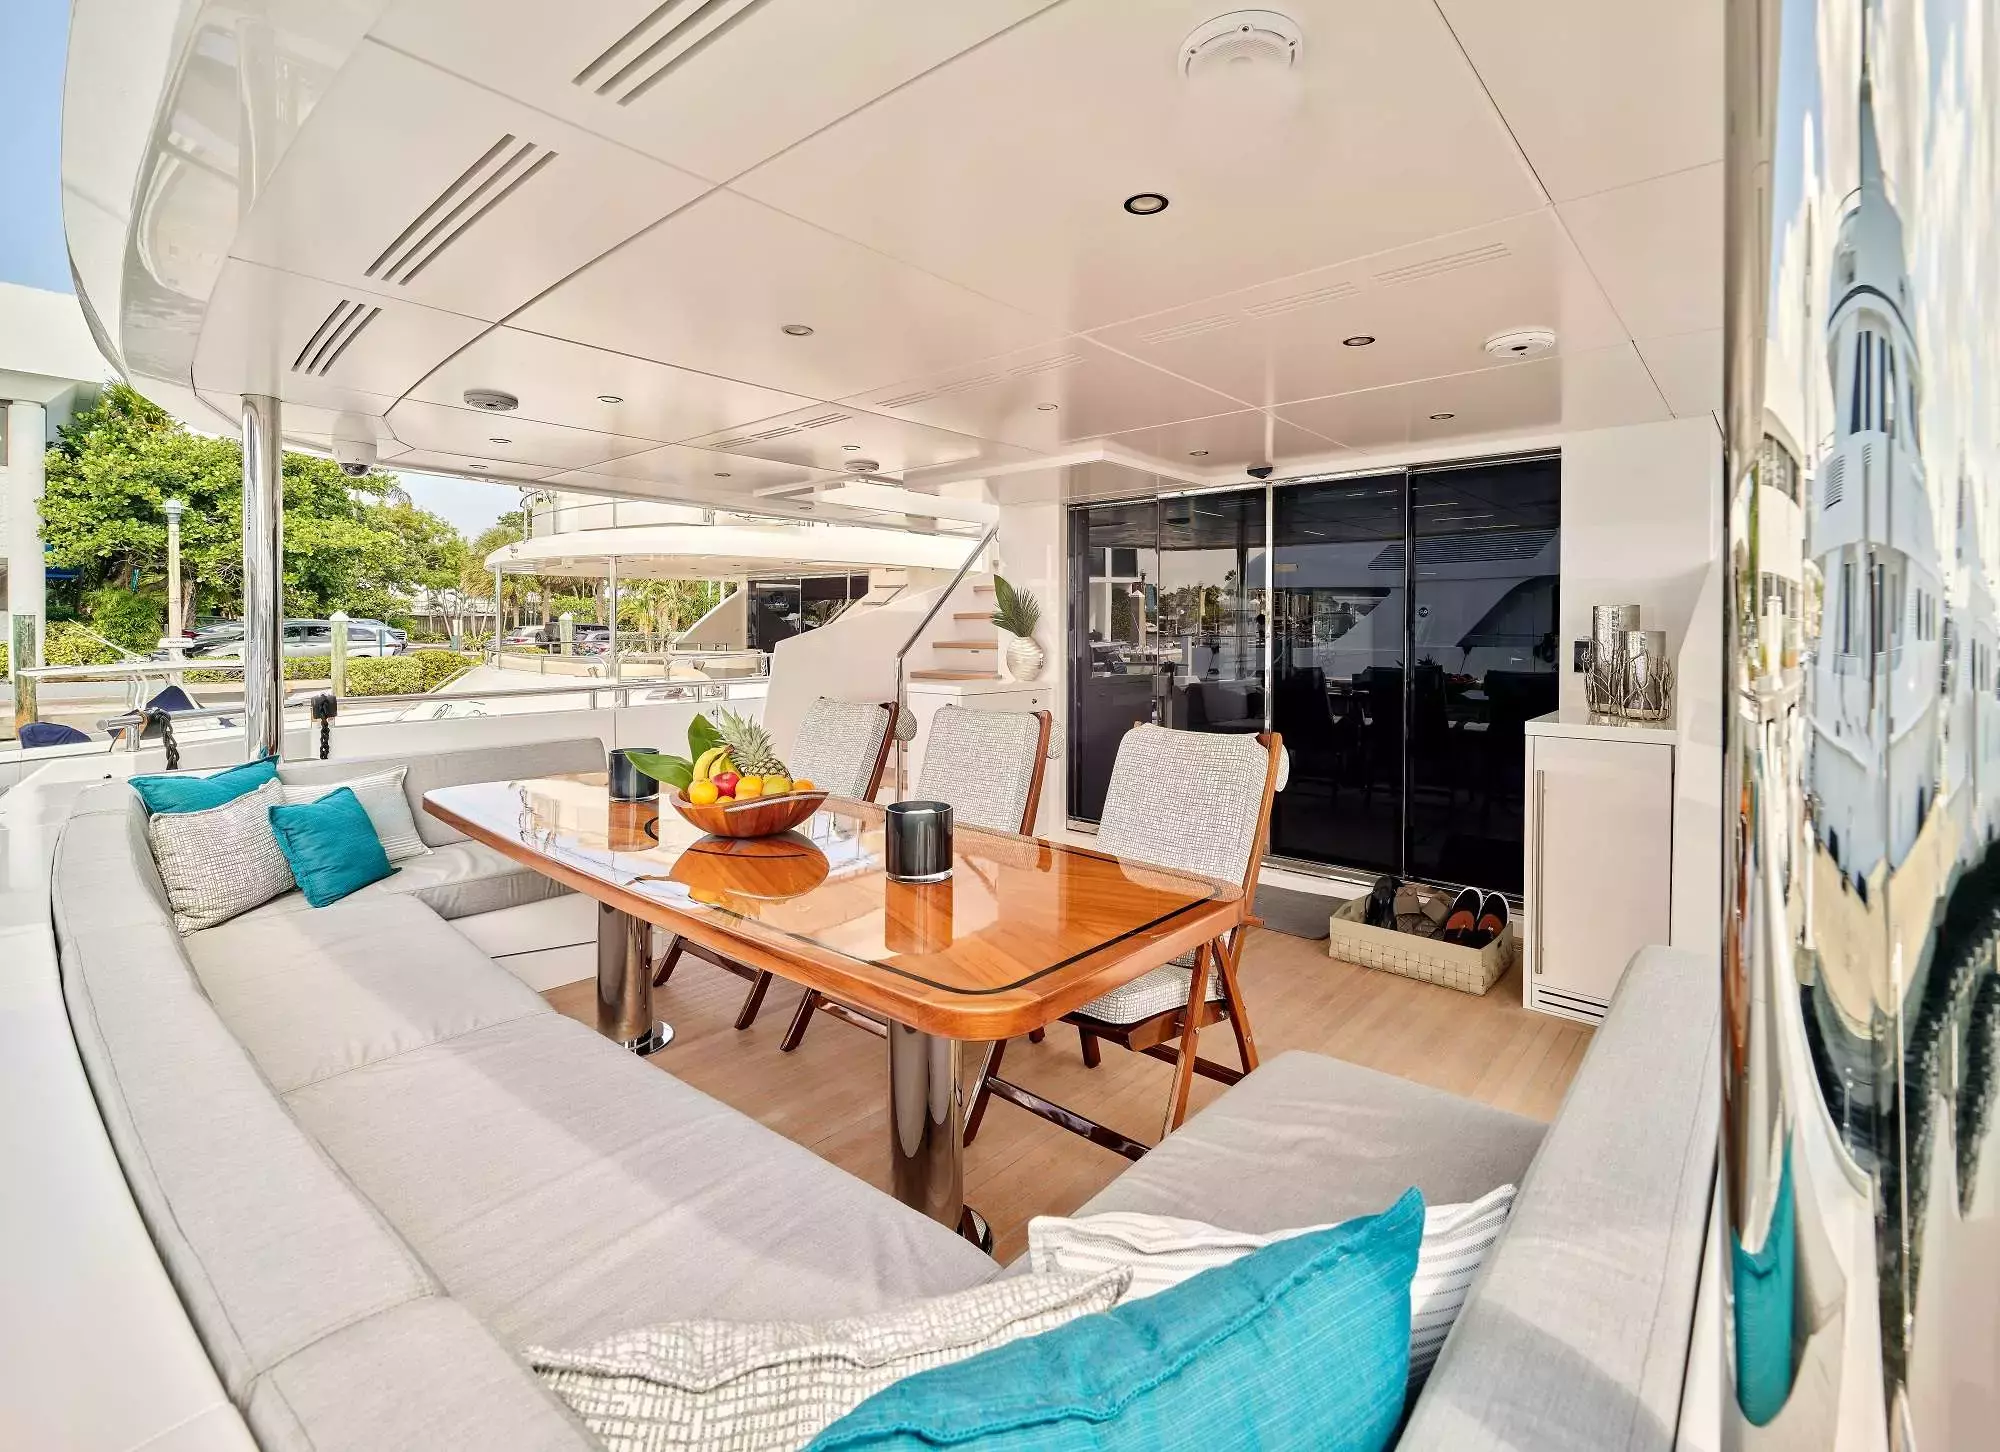 Romeo Foxtrot by Hargrave - Top rates for a Charter of a private Superyacht in Barbados